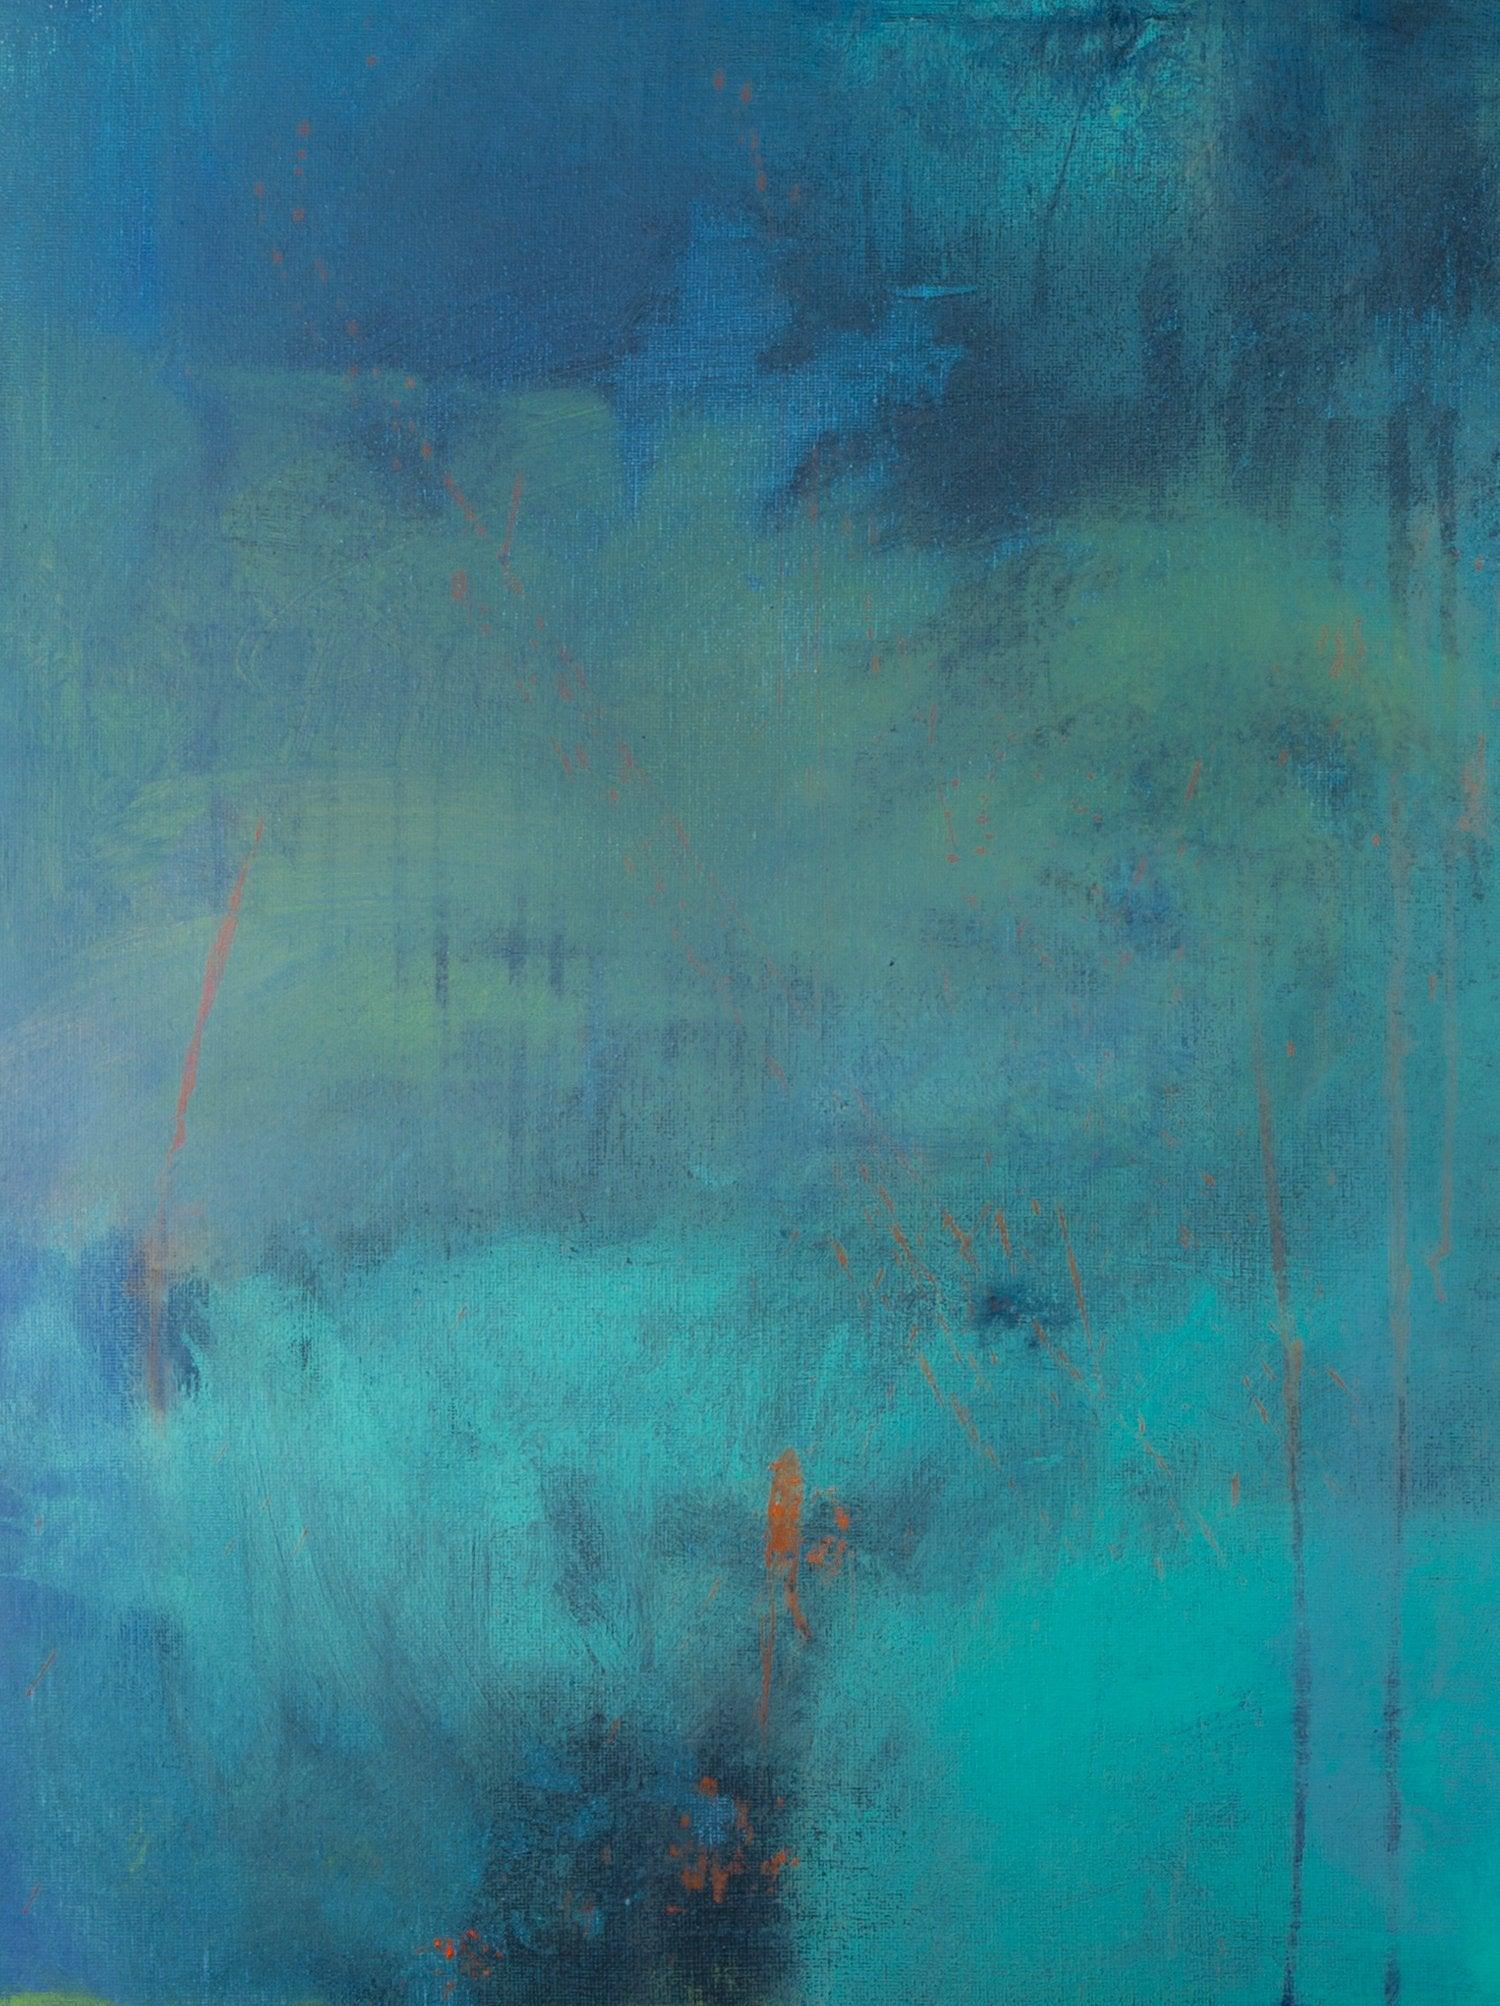 Teal wall art abstract painting, large wall art, gallery wall, wall art canvas, green abstract, Landscape painting by Camilo Mattis - camilomattis.com